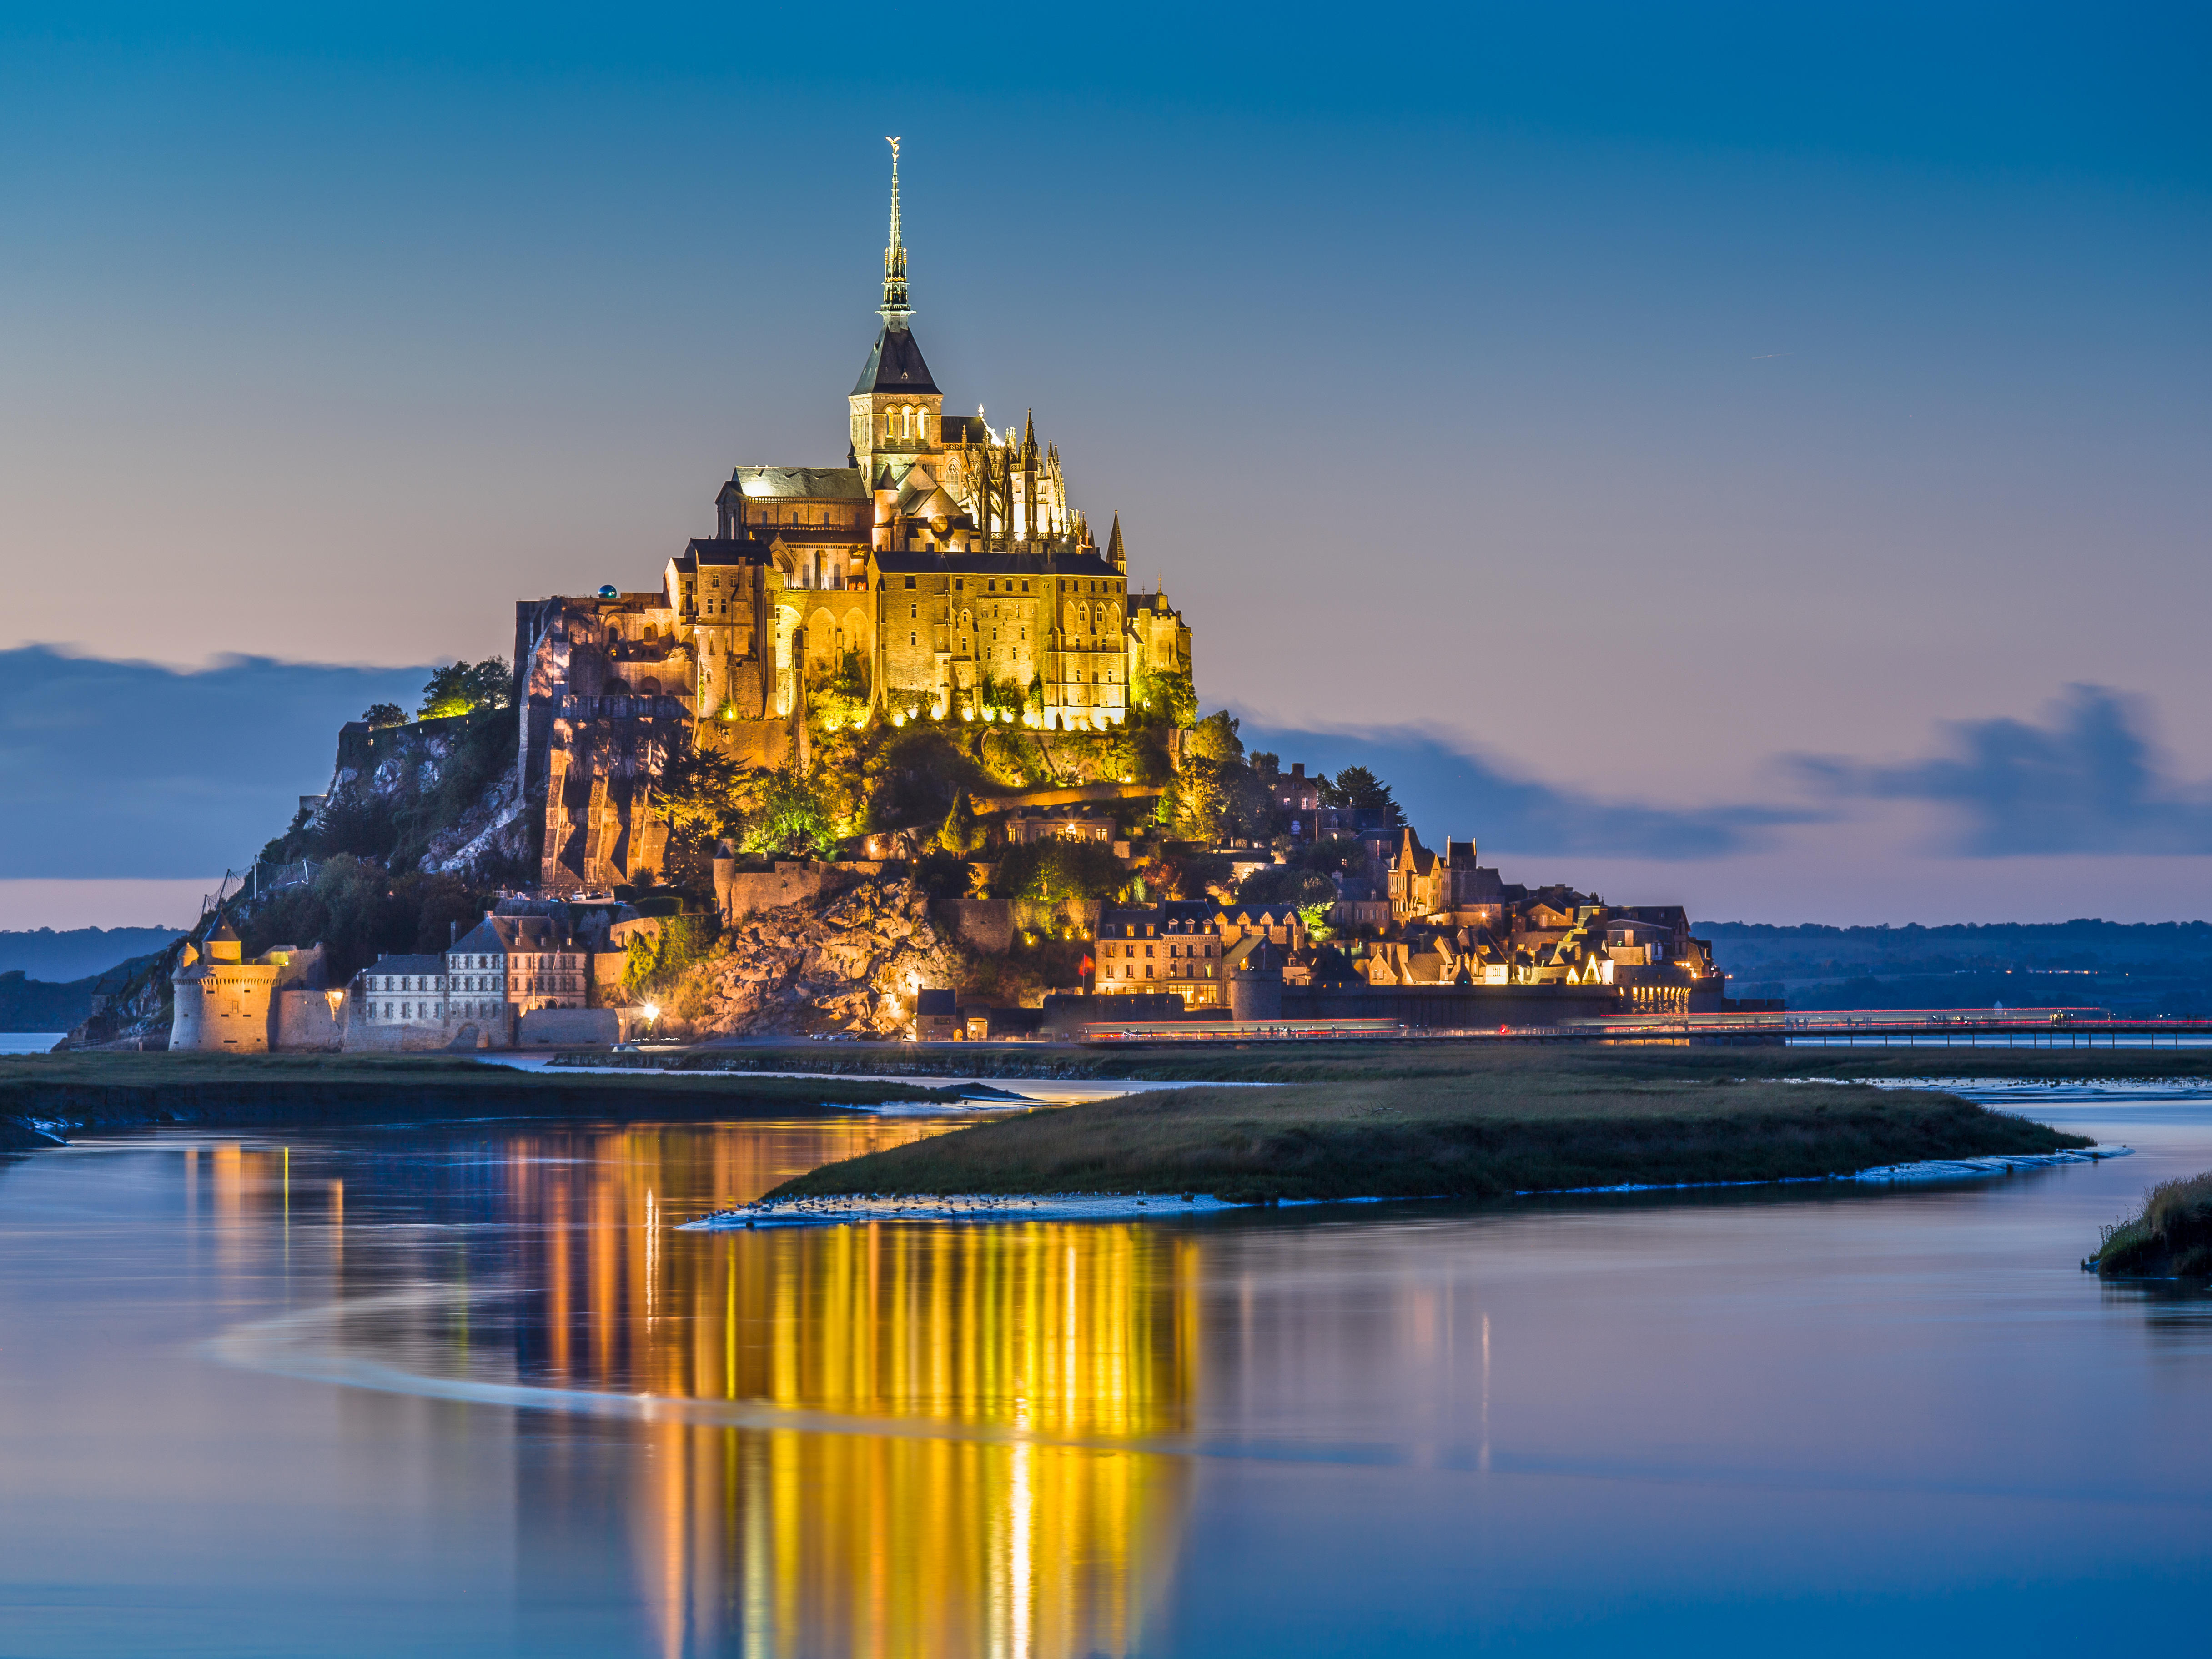 Normandy lit up at night.